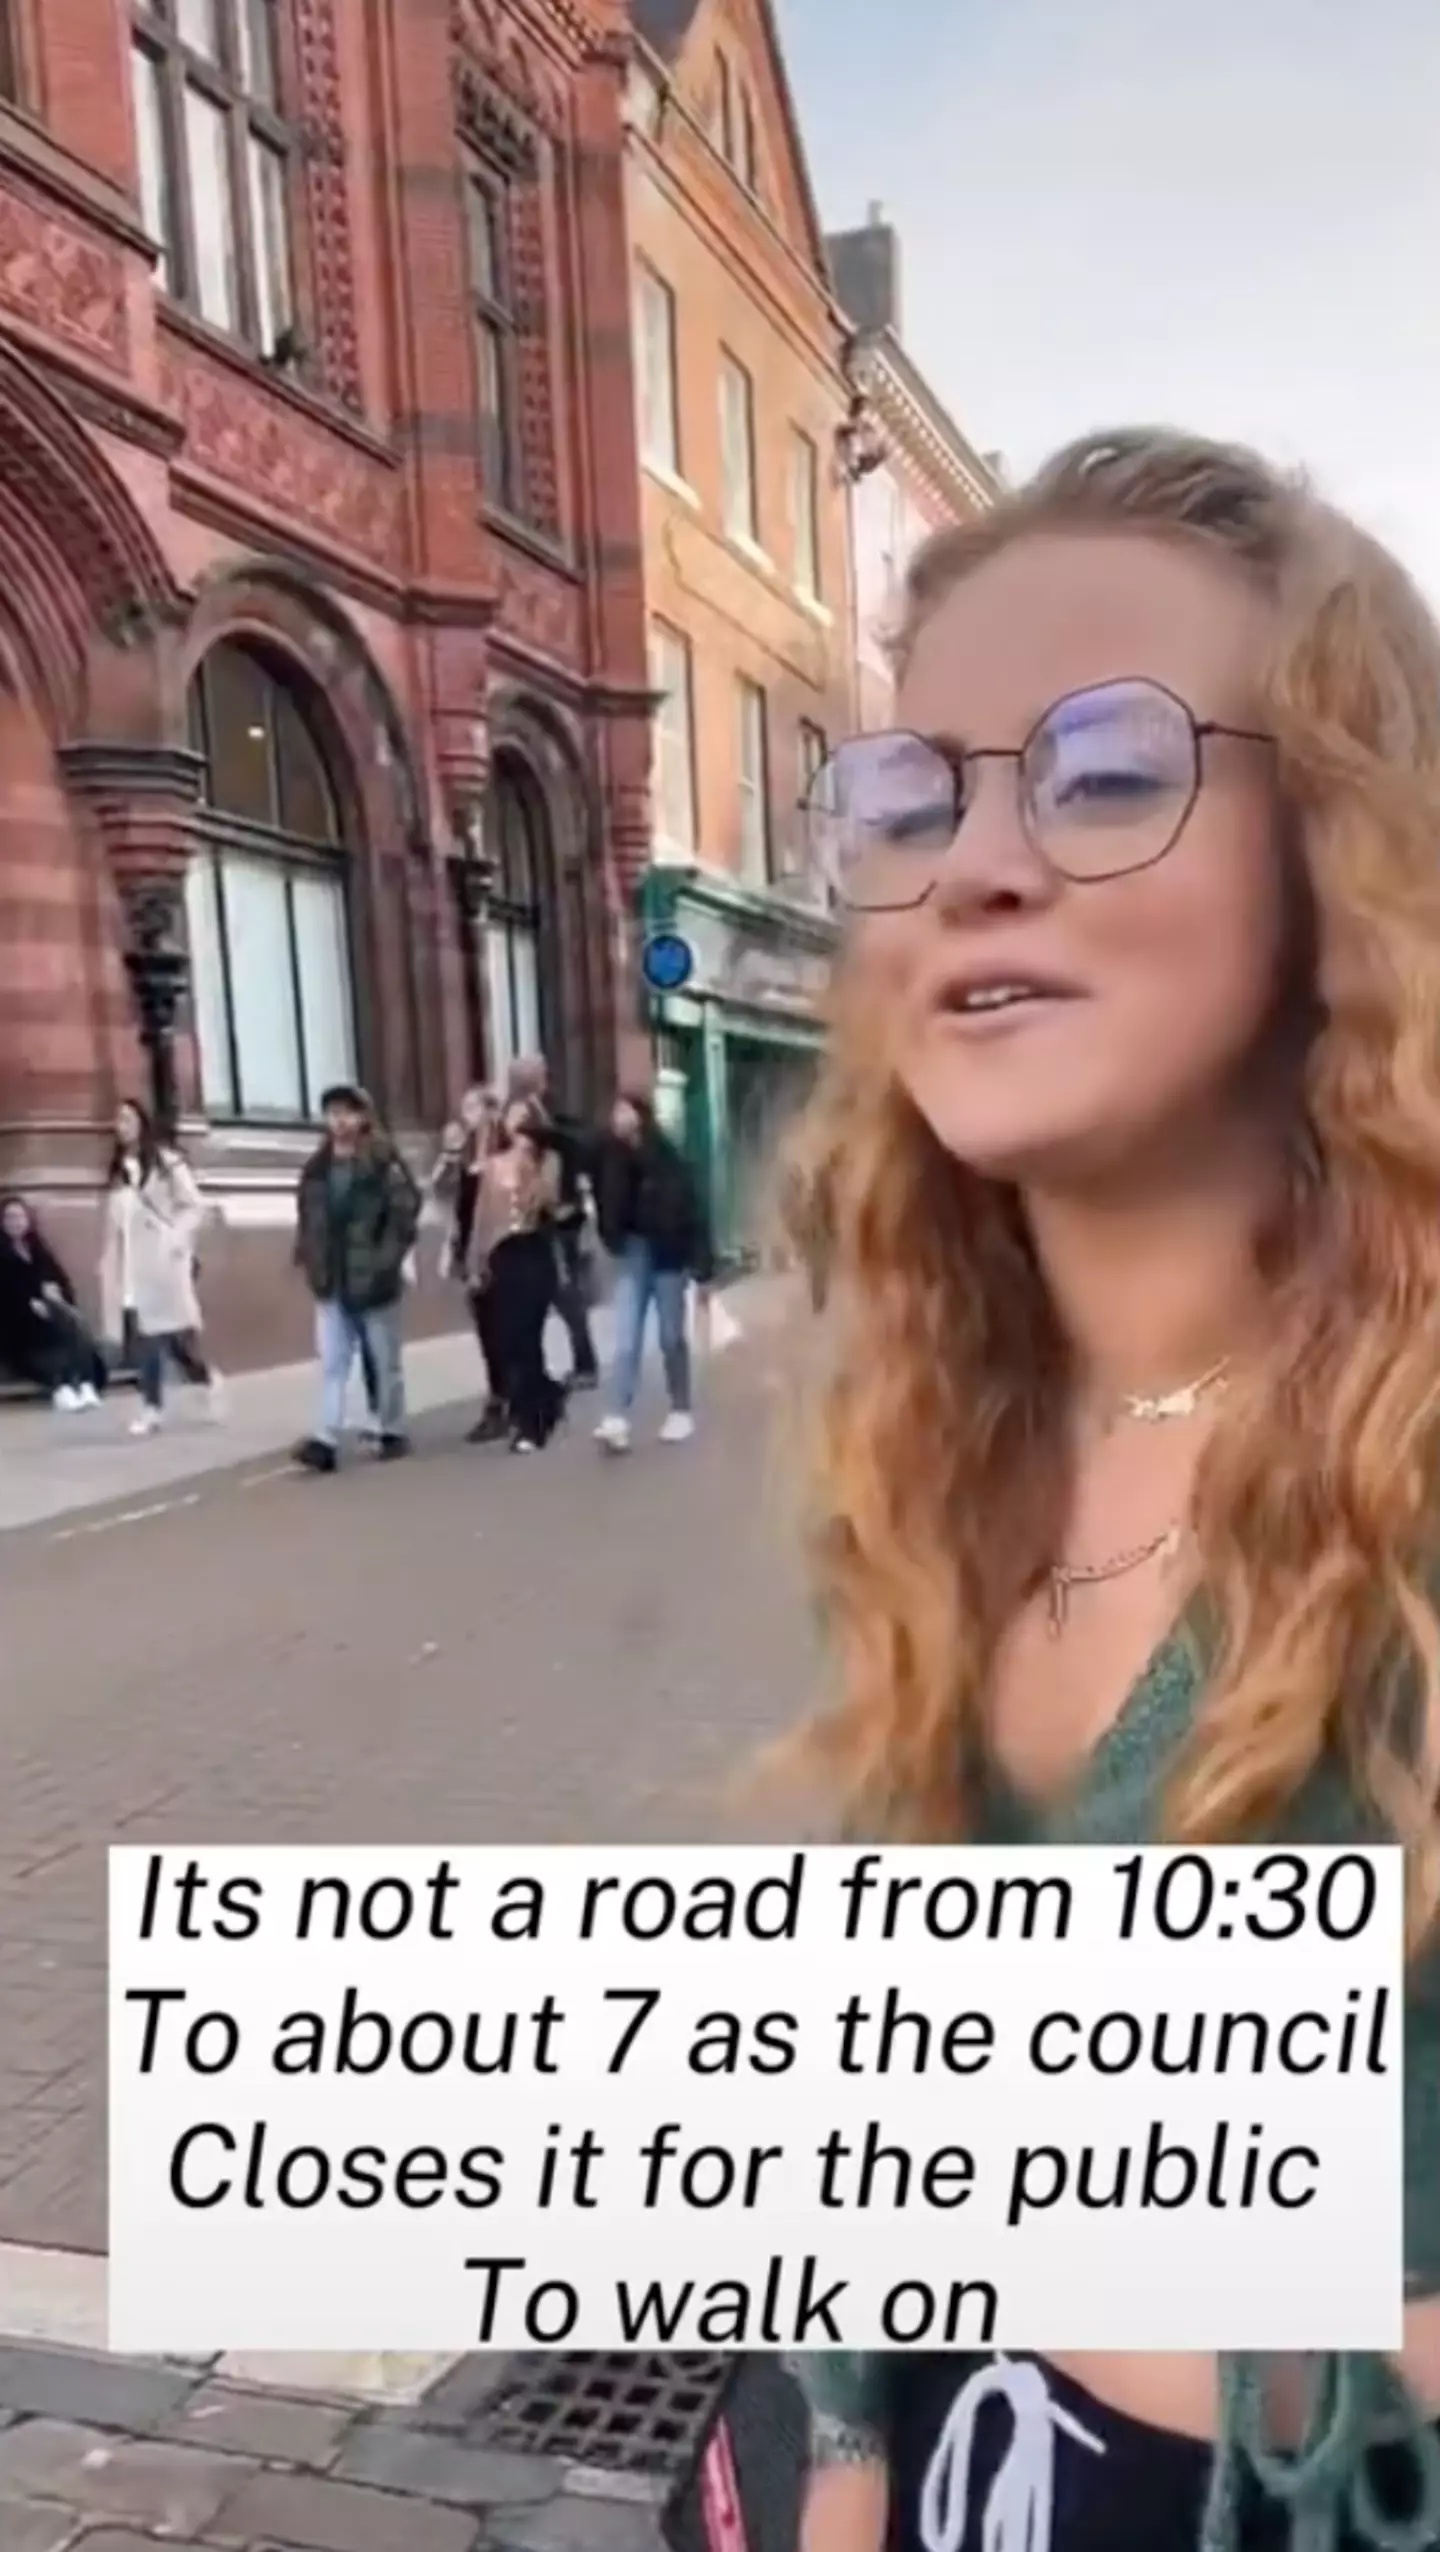 She pointed out that the road is closed to cars daily.